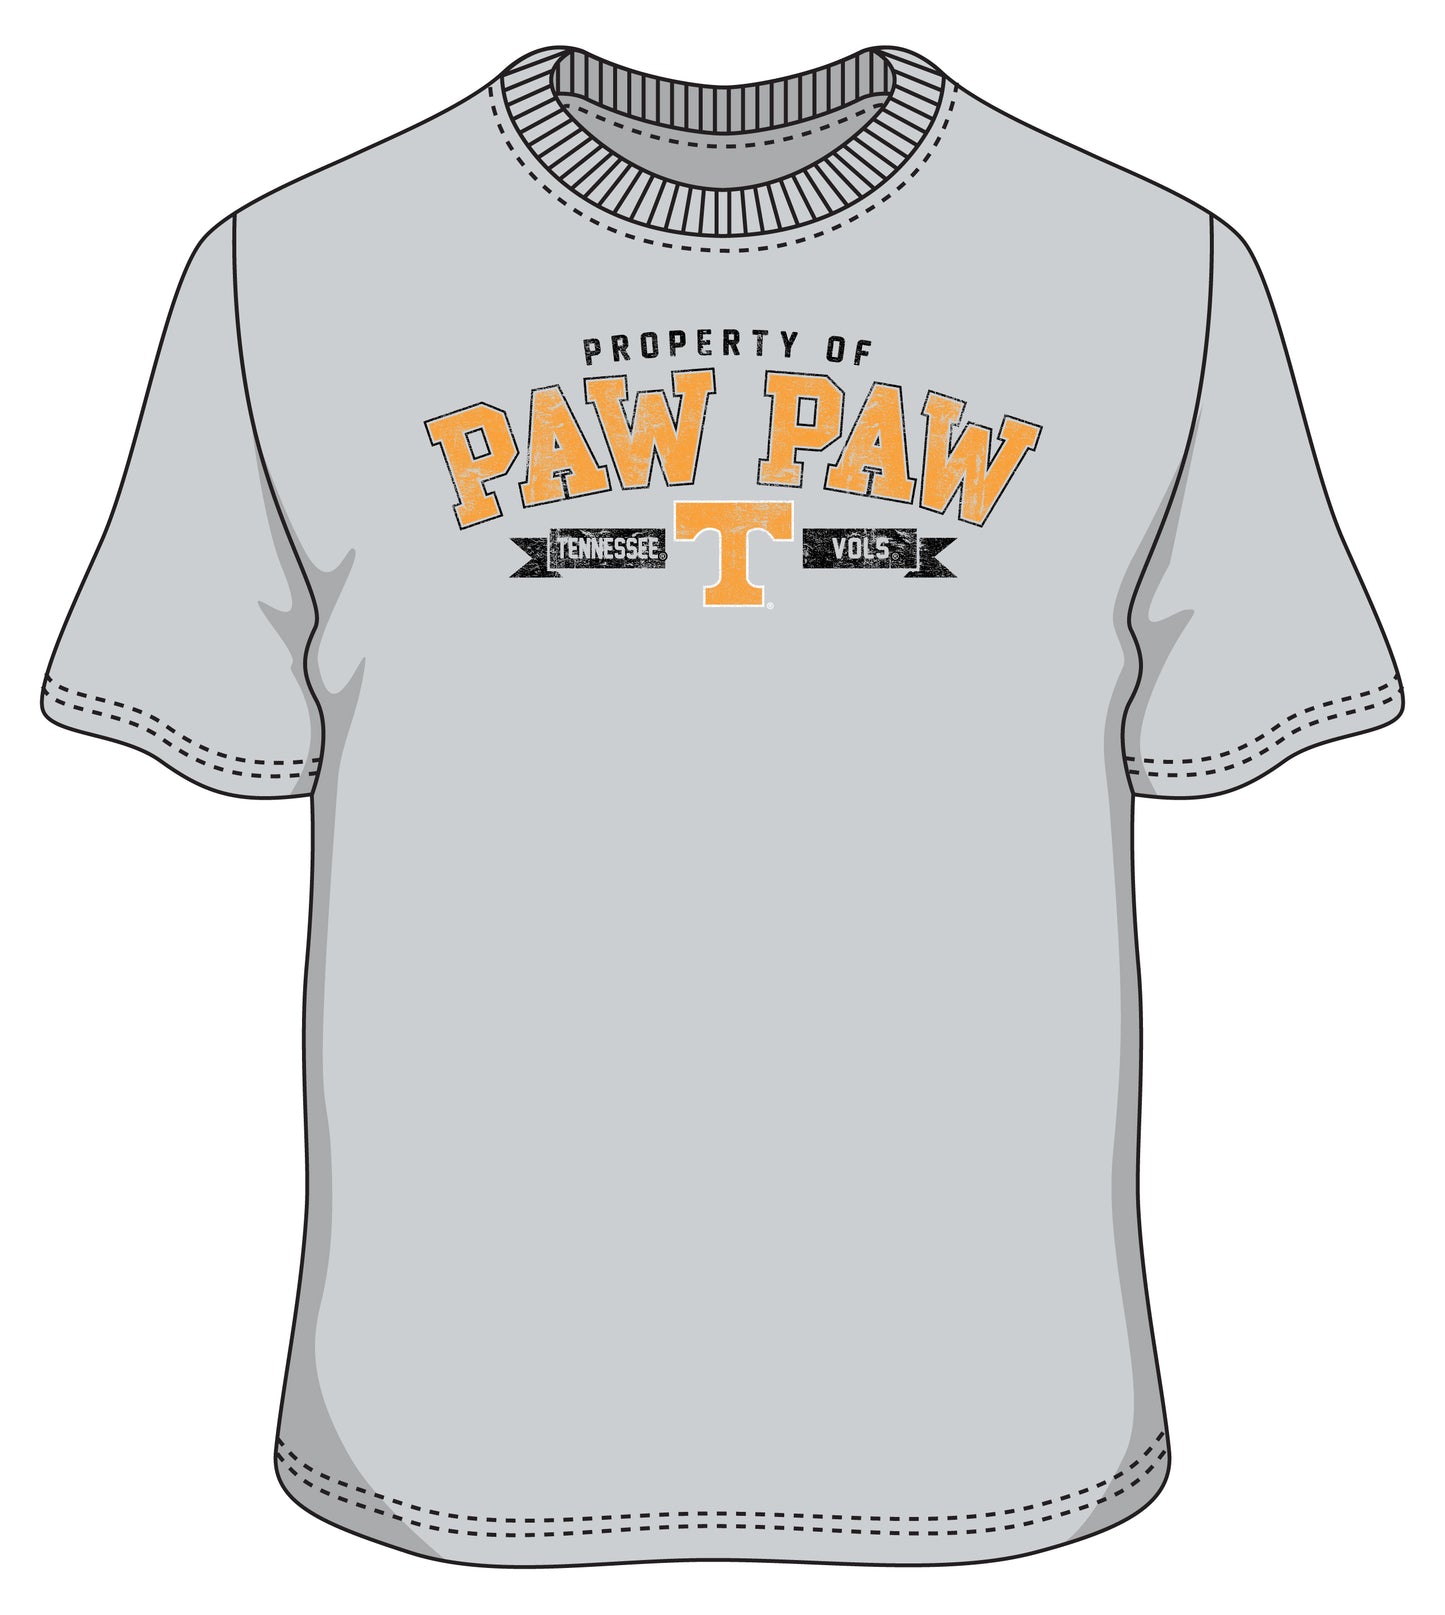 Tennessee Paw Paw S/S Tees